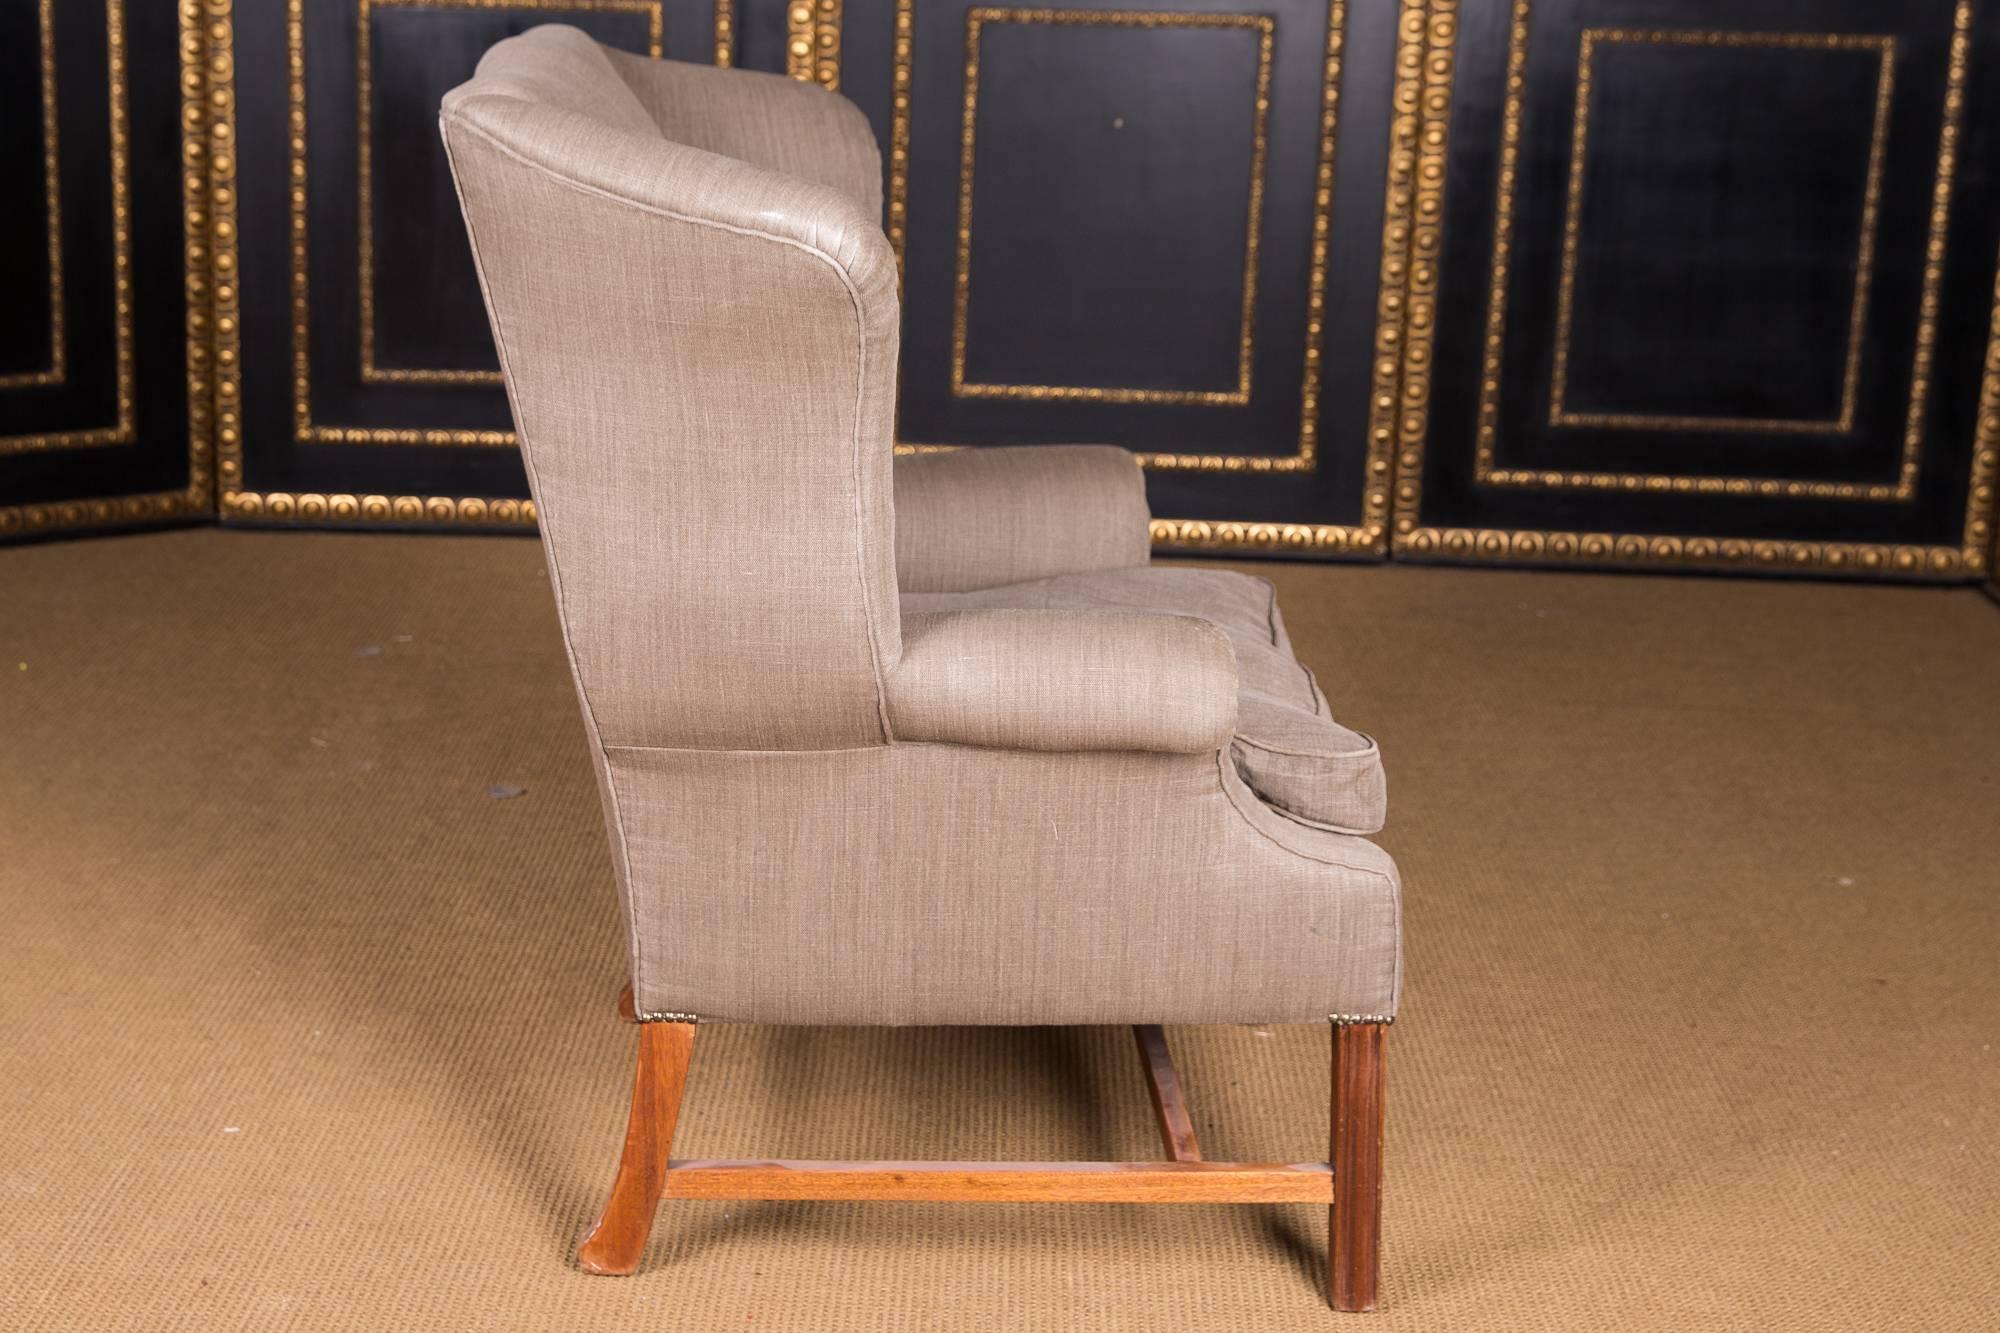 Great Britain (UK) Original English Chesterfield Armchair with High Quality Linen Fabric